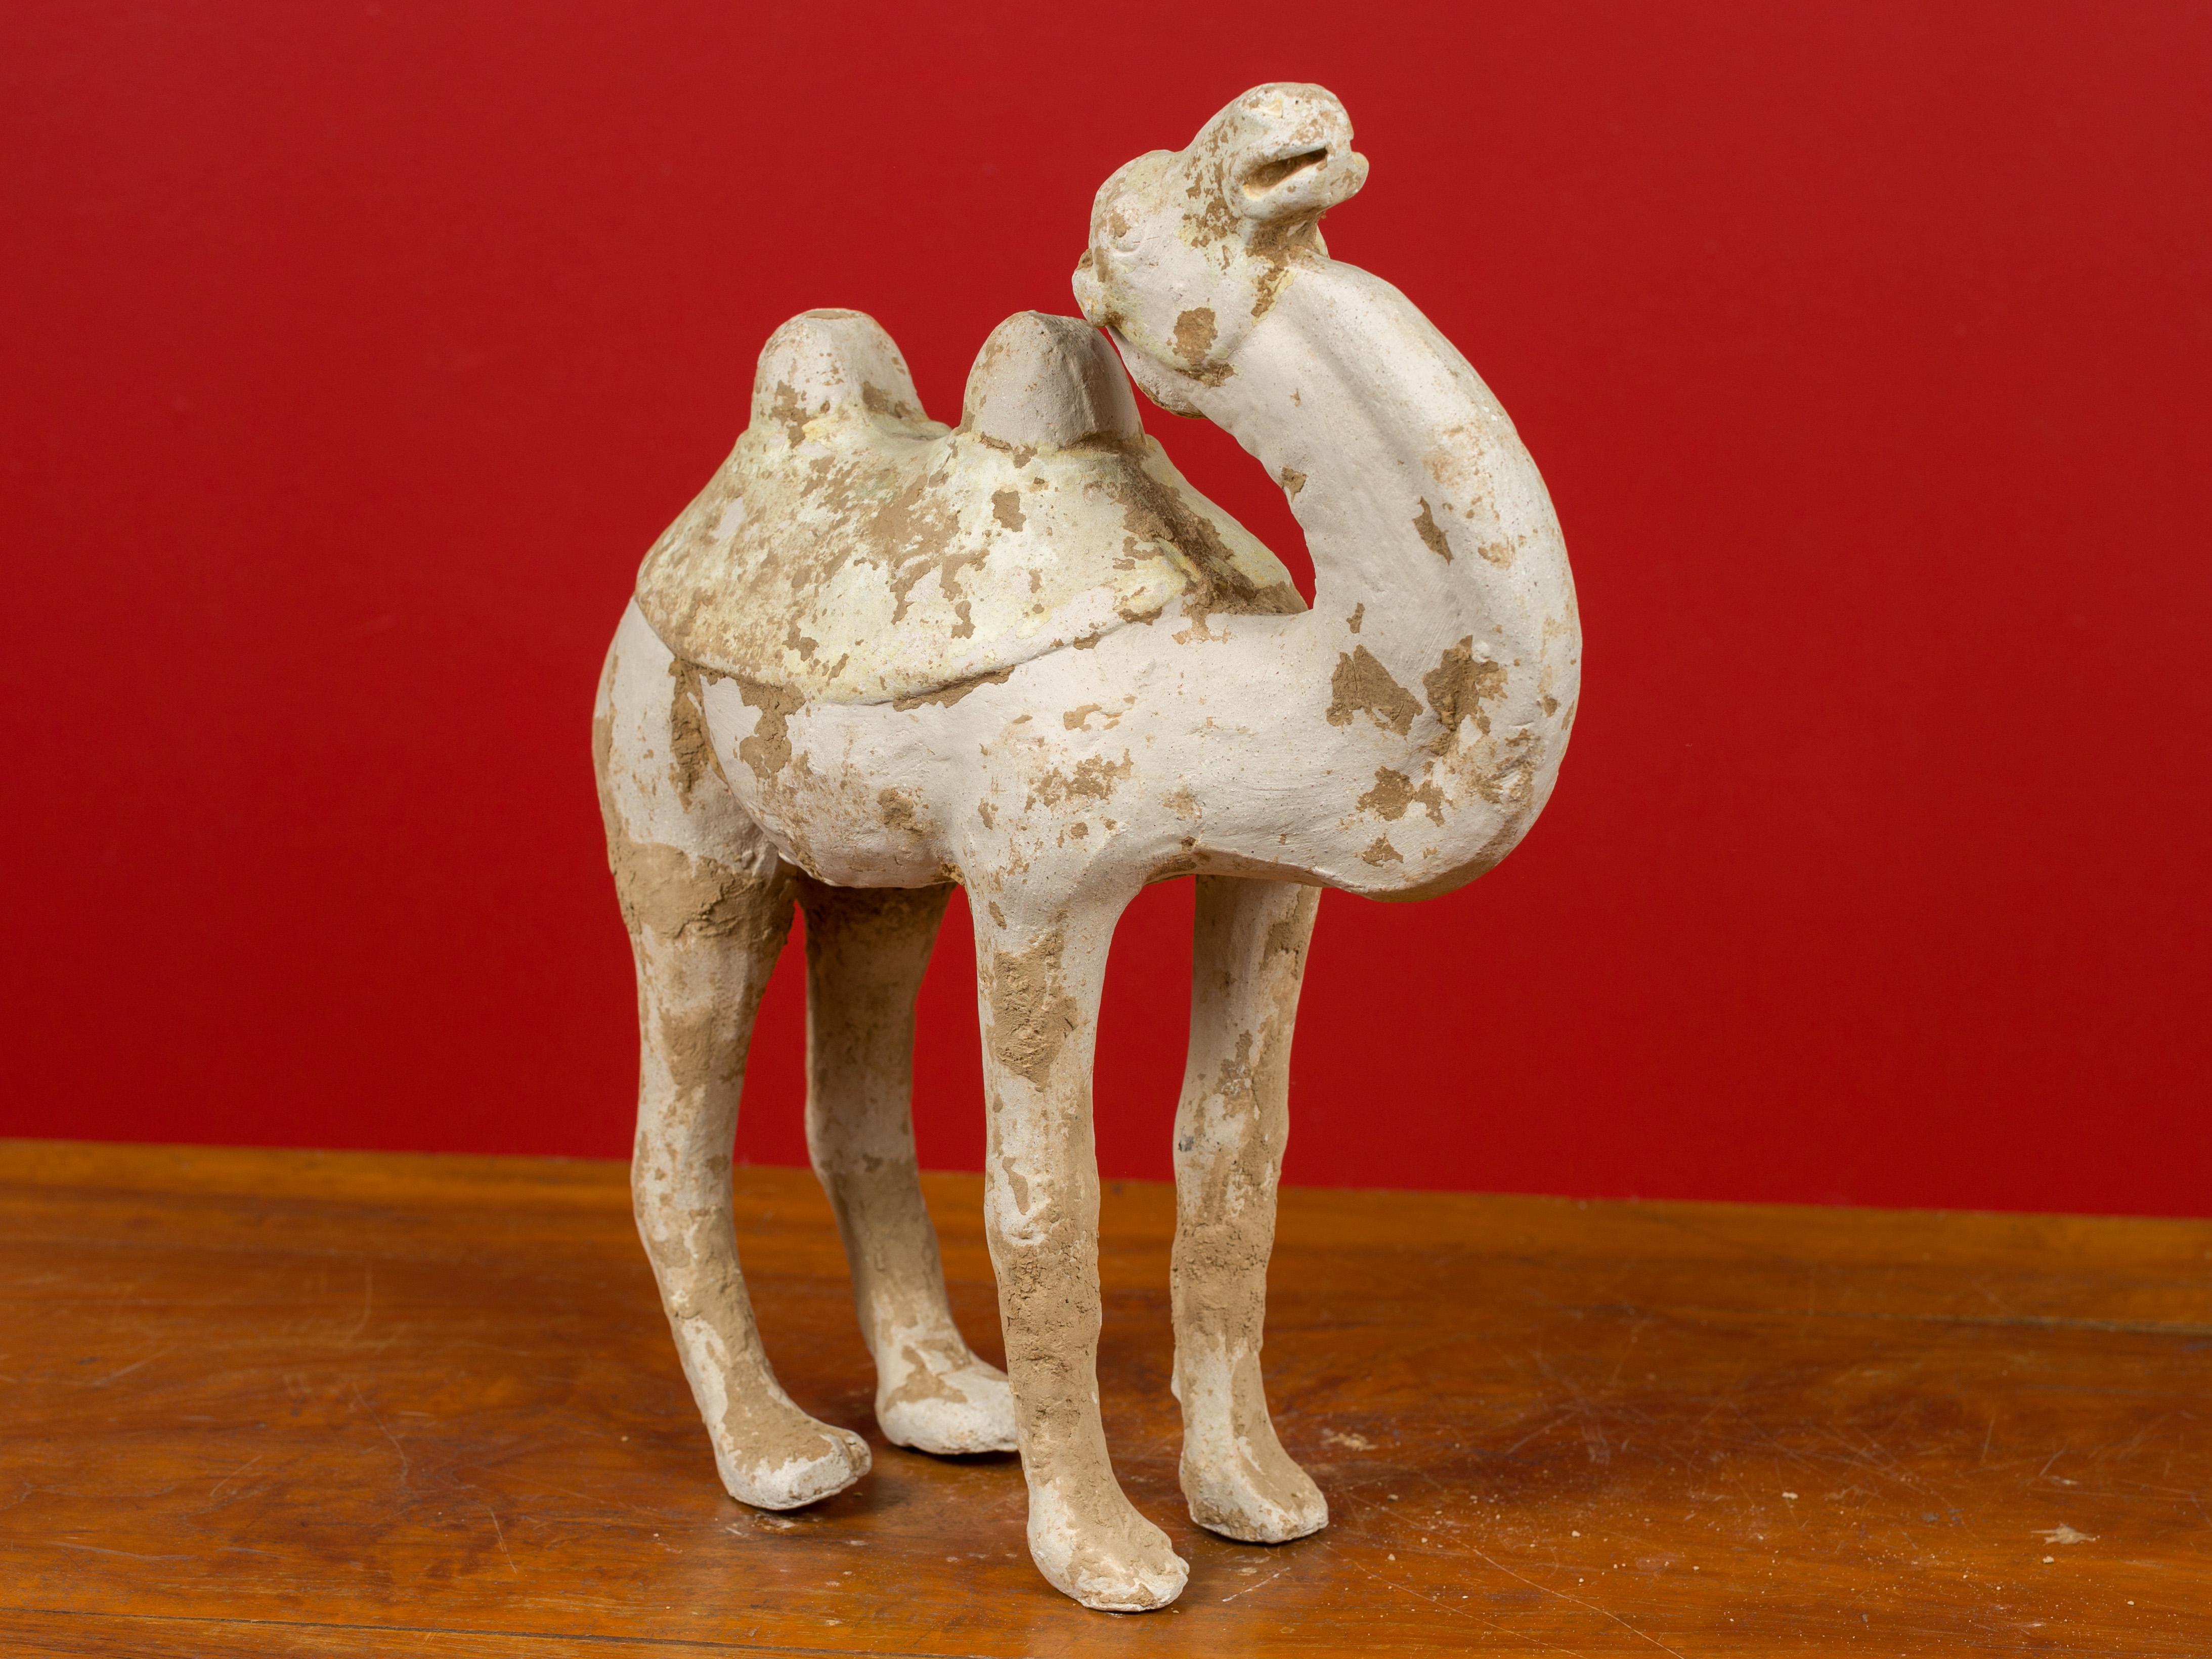 Han Dynasty Chinese Mingqi Terracotta Camel with Mineral Deposits 202 BC-200 AD  6